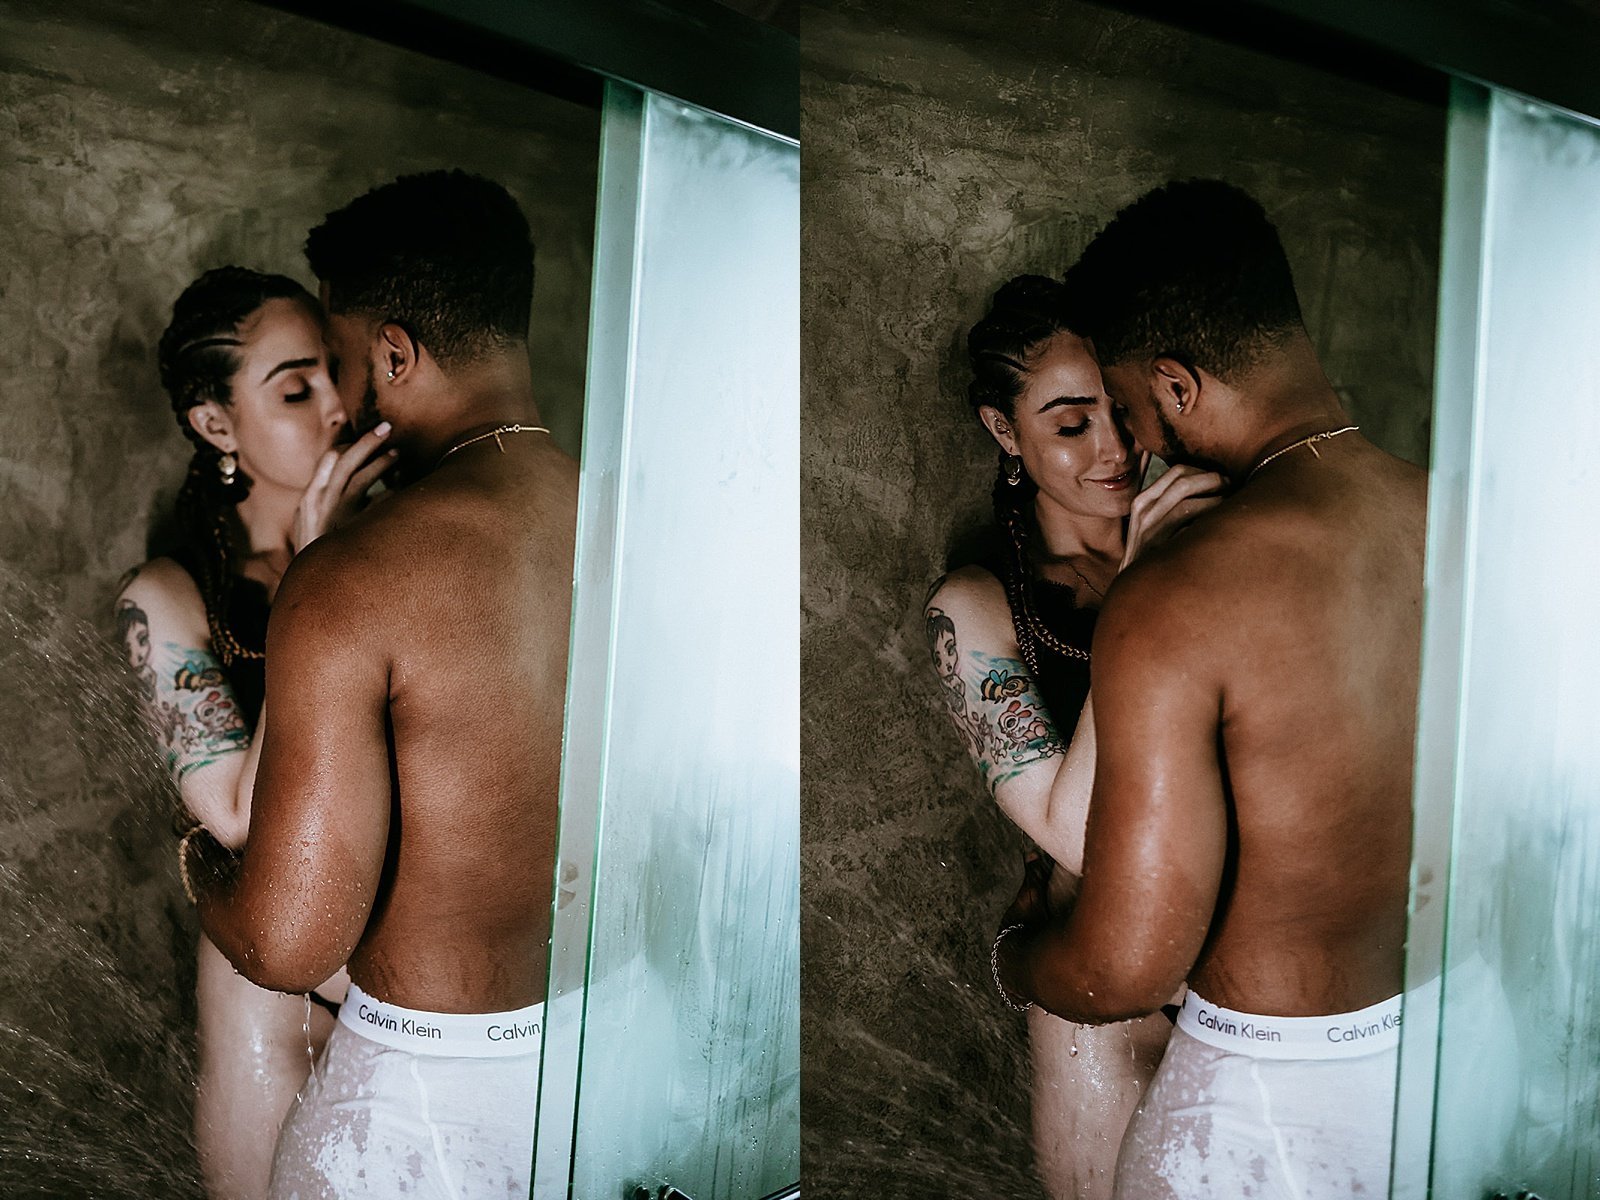  Man and woman hugging in a shower for intimate couples photo shoot 